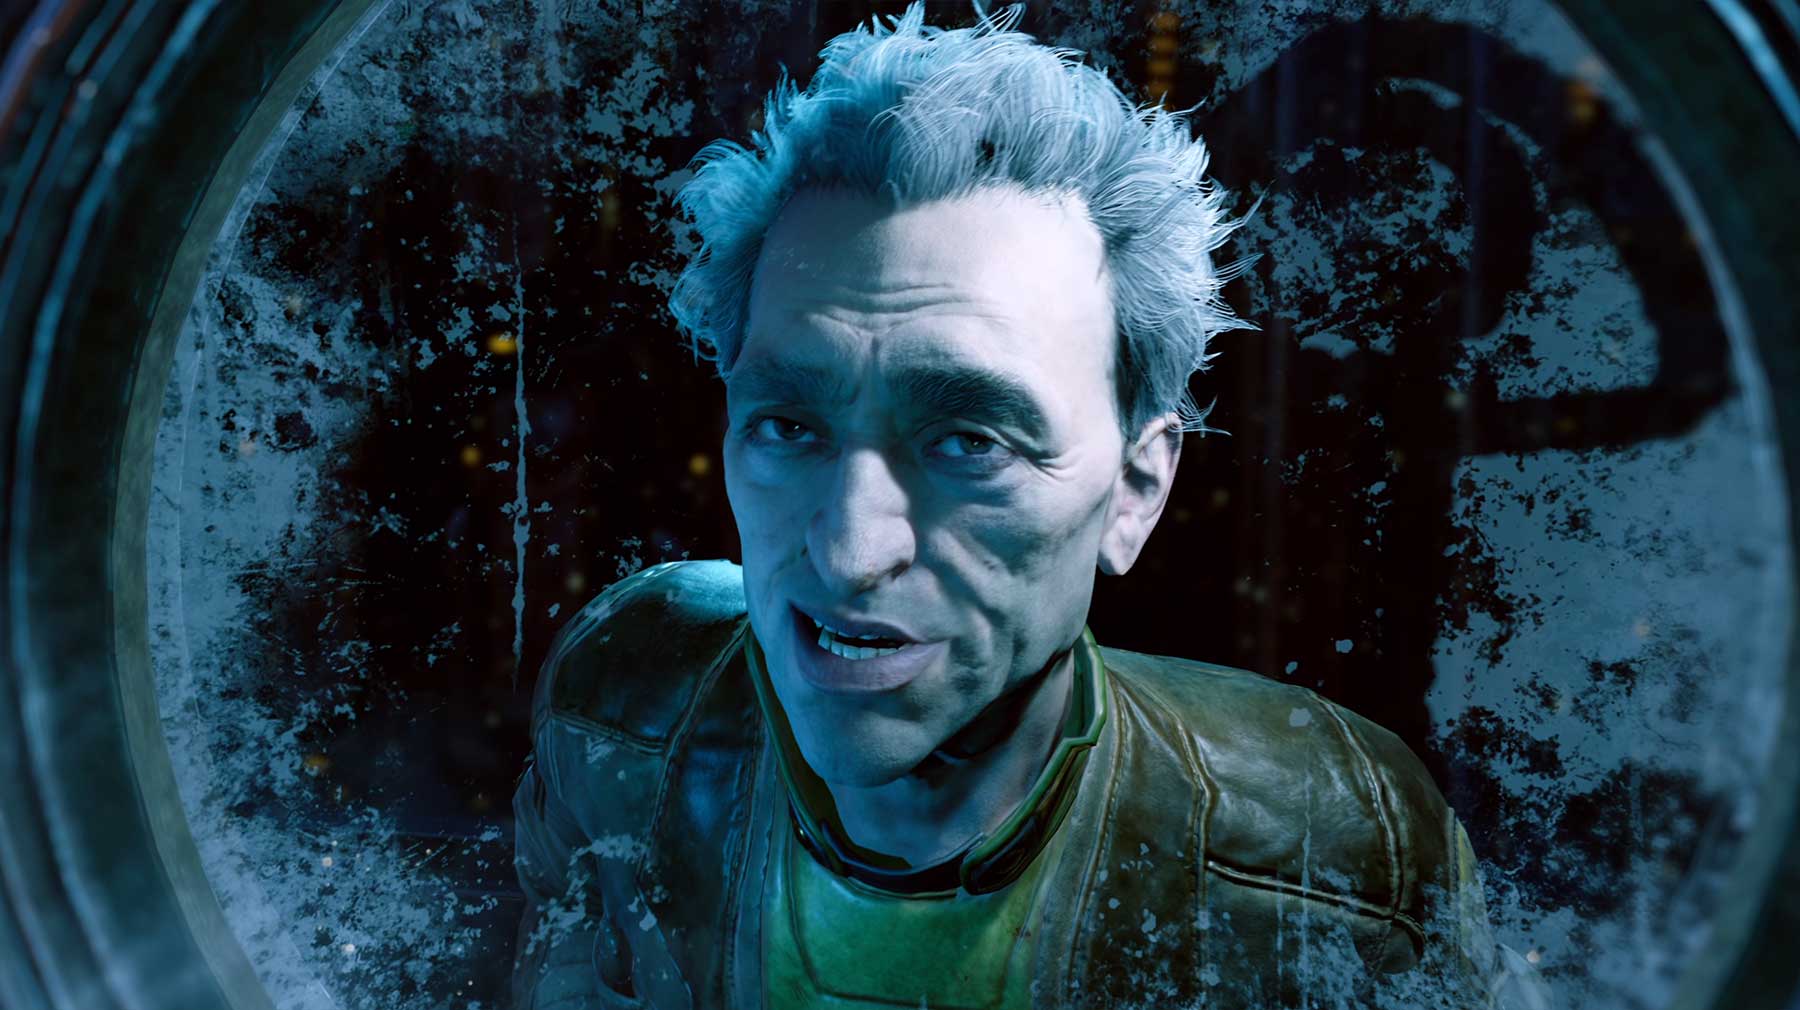 Trailer zum First Person SciFi-RPG "The Outer Worlds" the-outer-worlds-trailer 